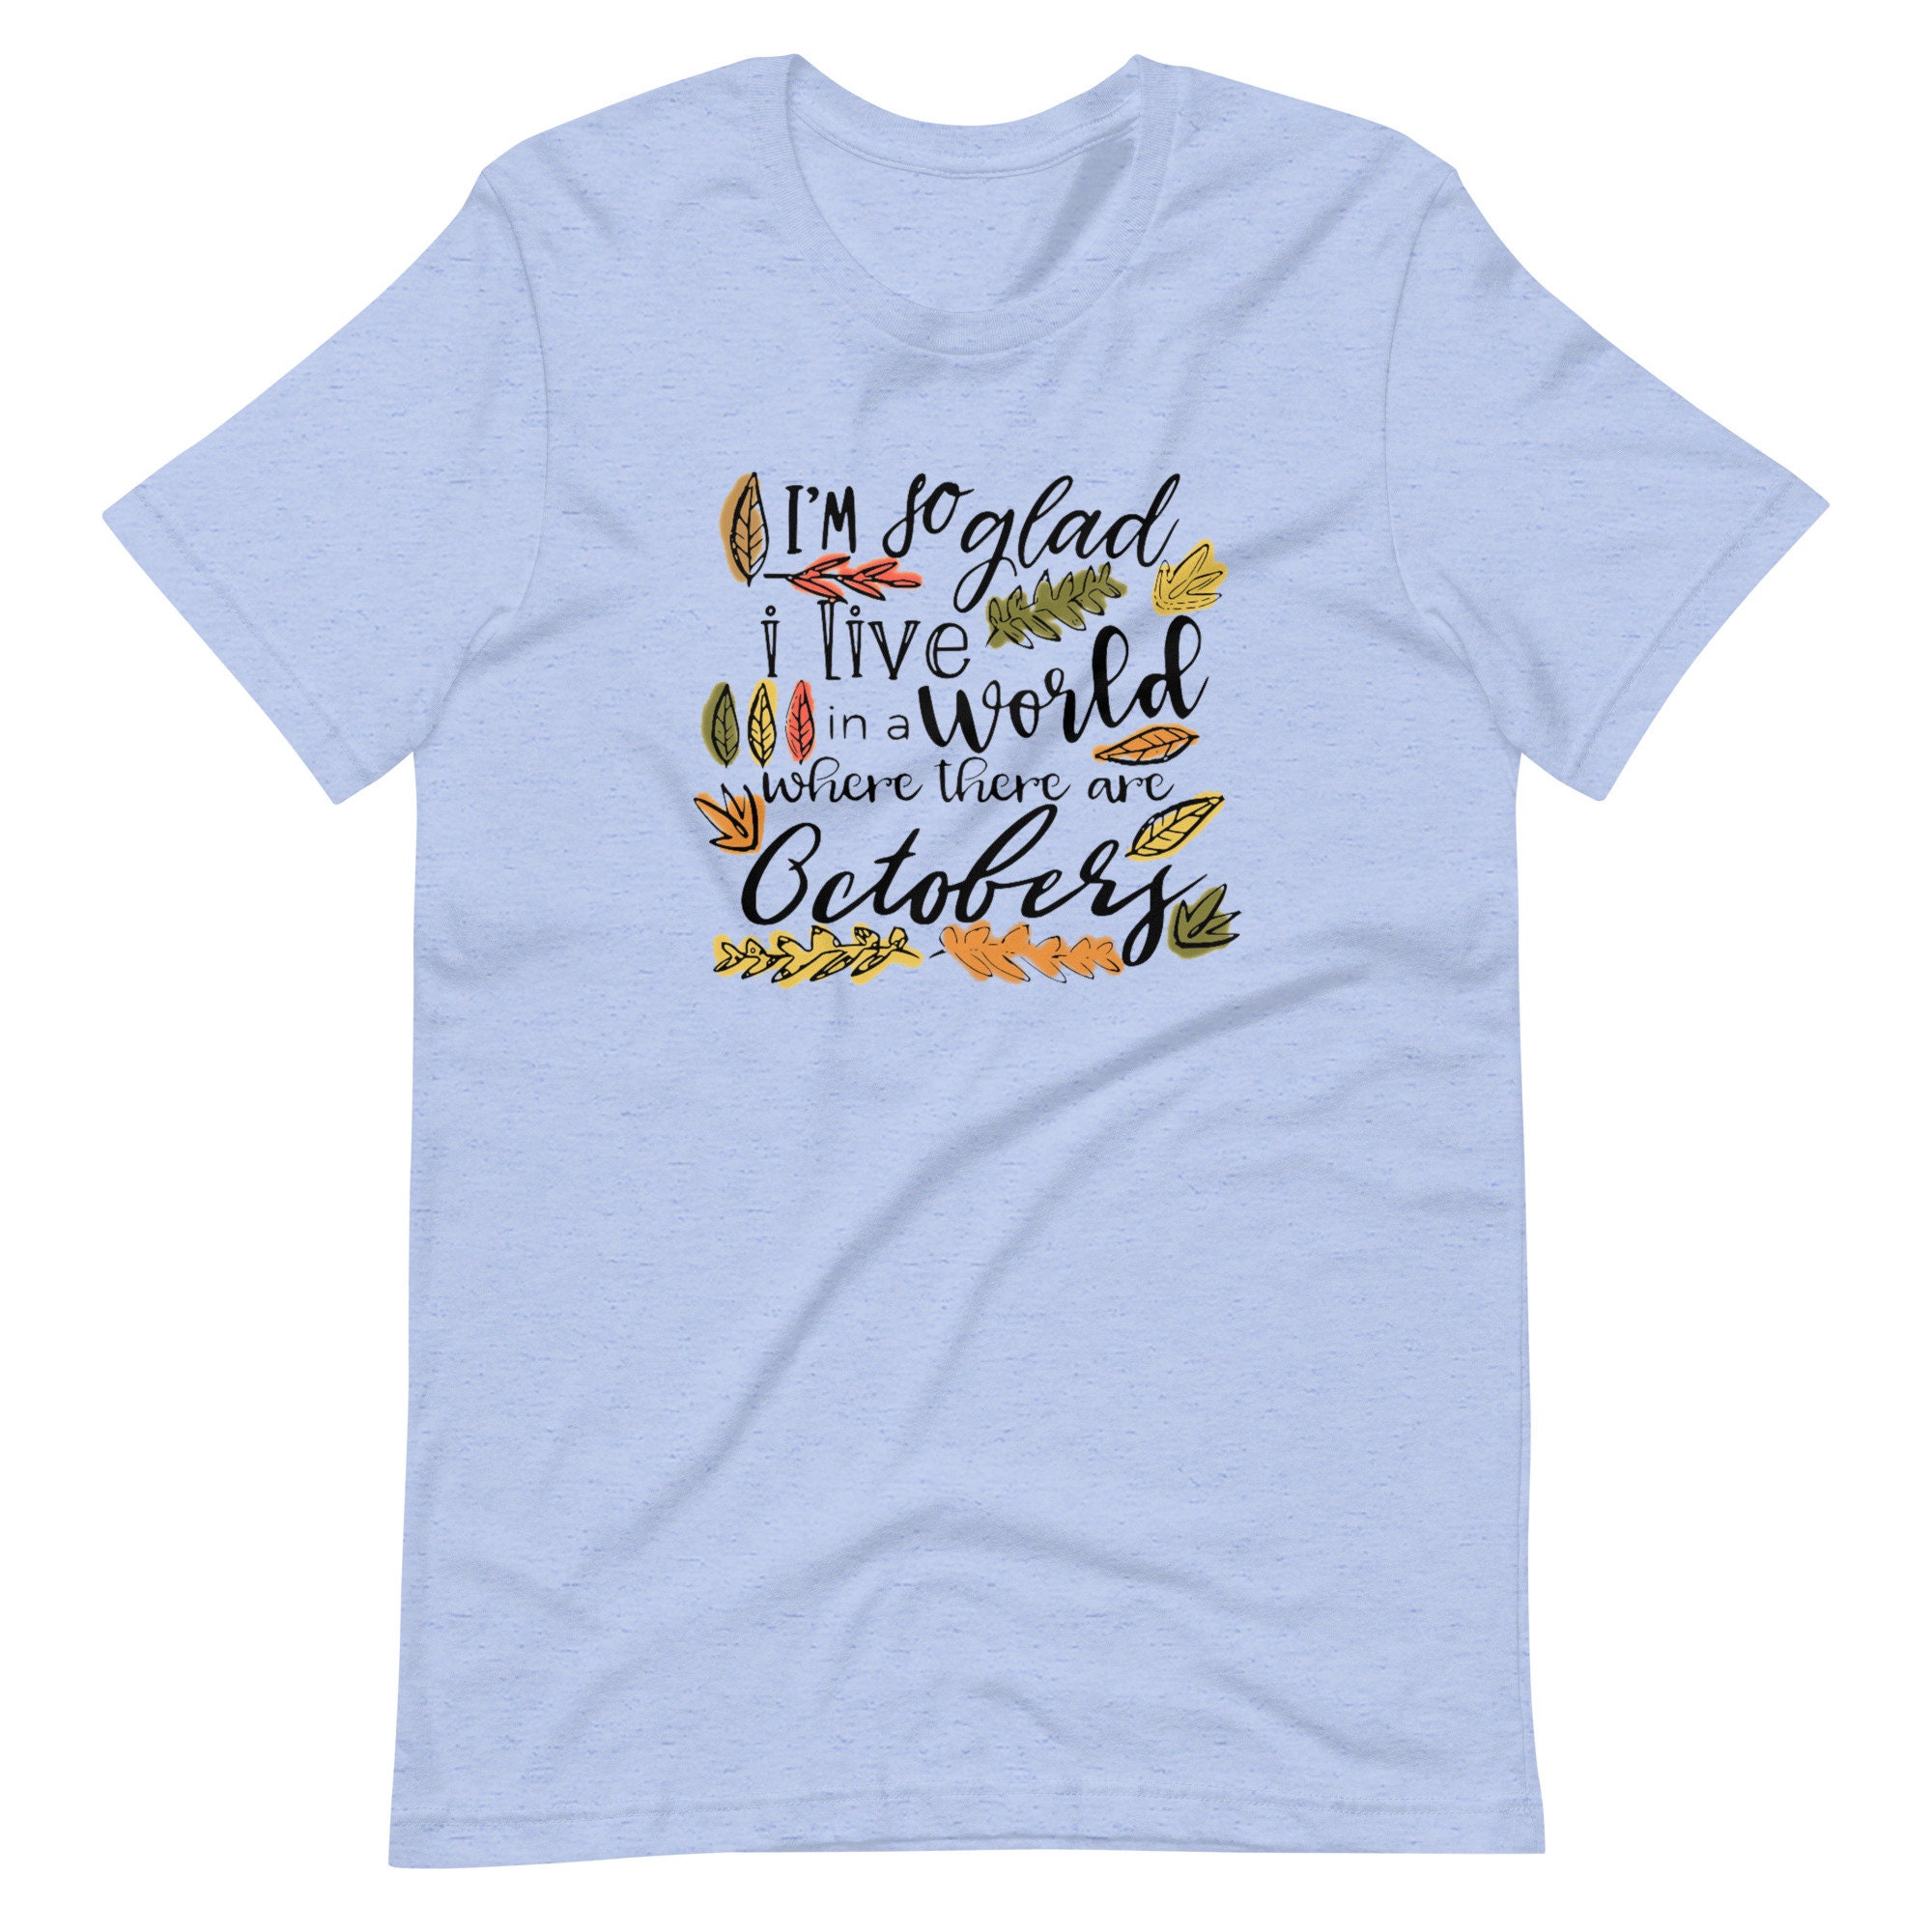 Anne of Green Gables Quote T-shirt October Fall Shirt - Etsy